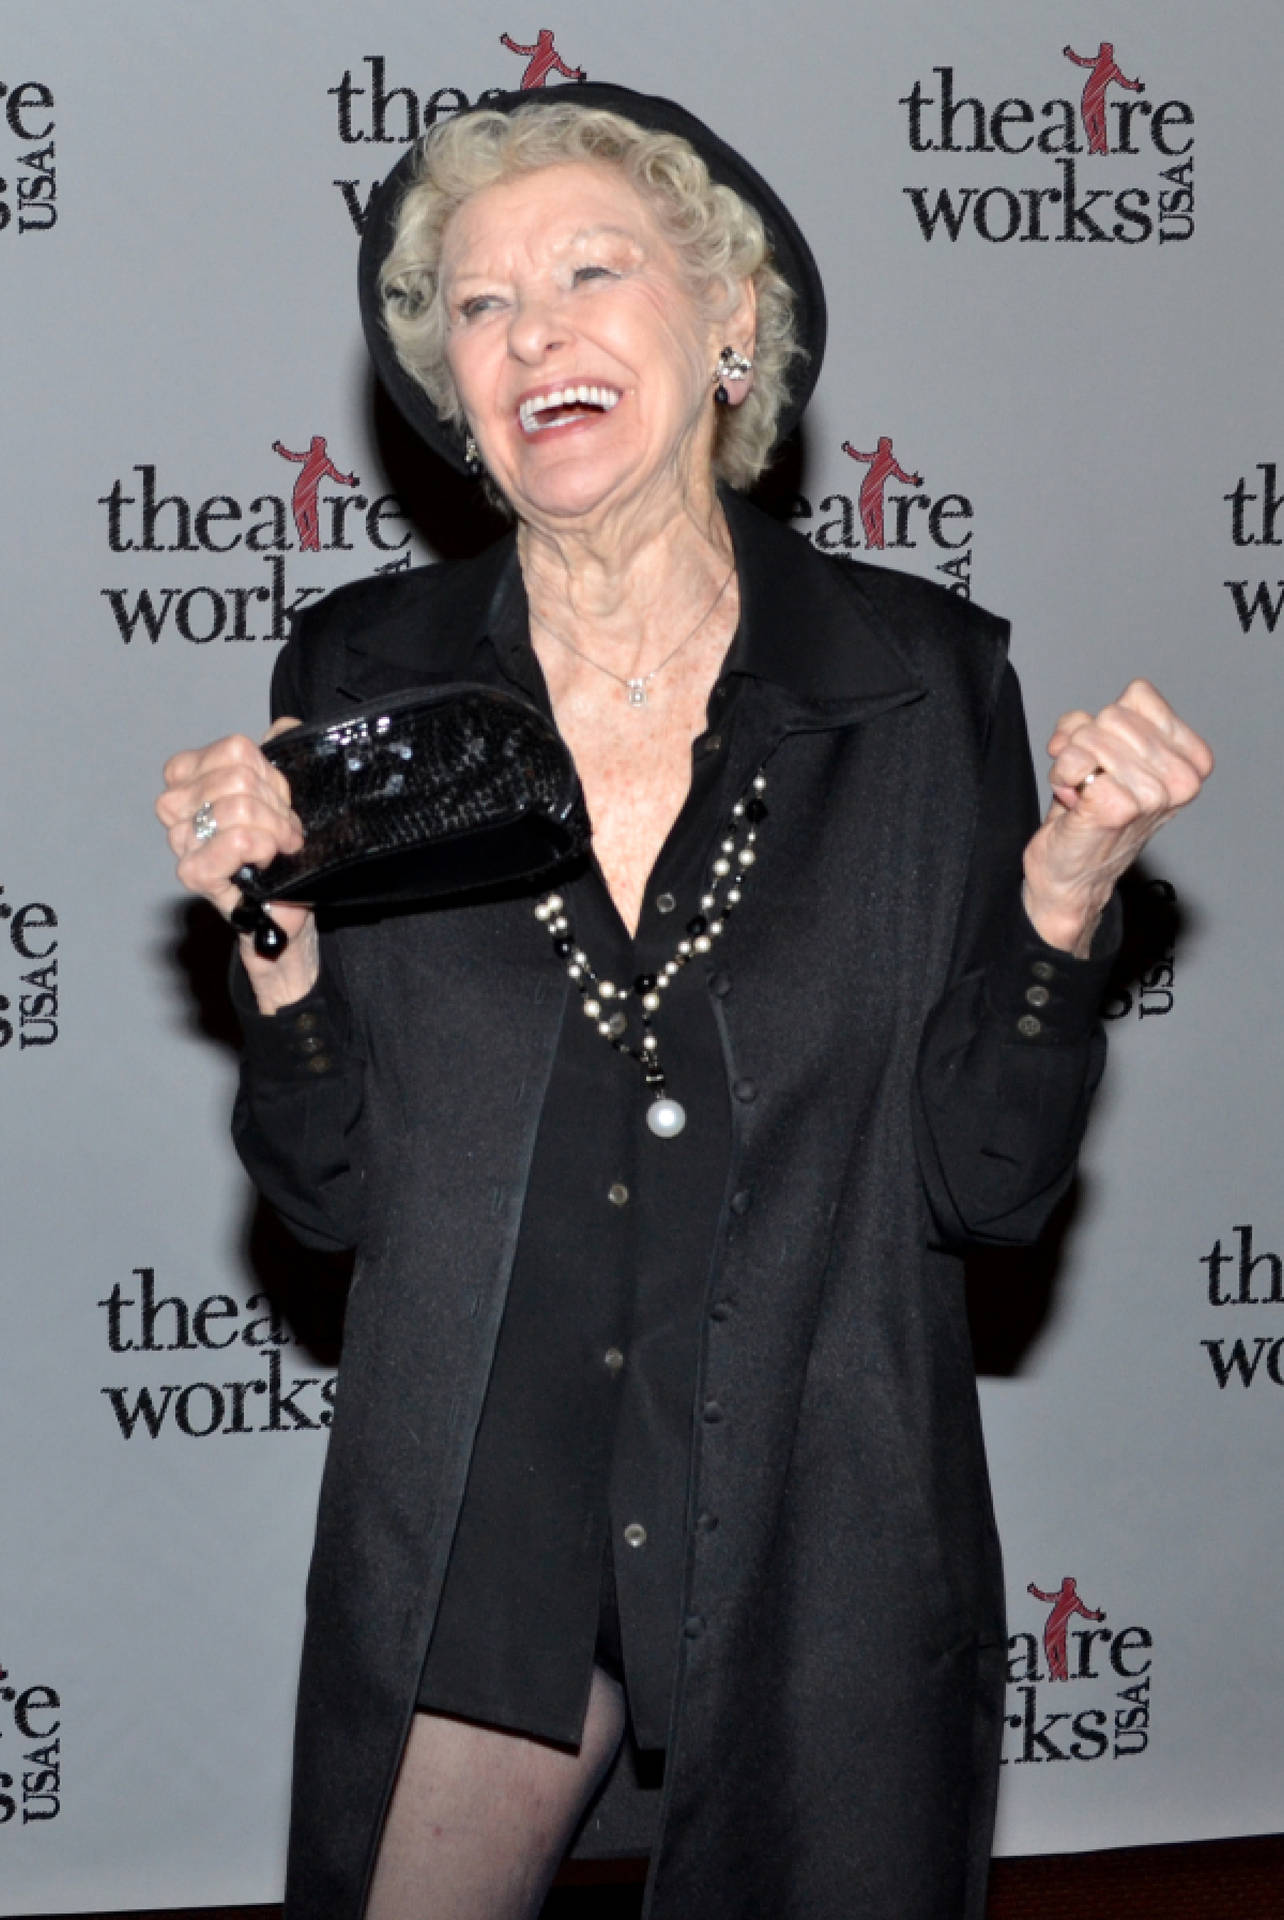 Elaine Stritch strikes a happy pose in an elegant black outfit. Wallpaper